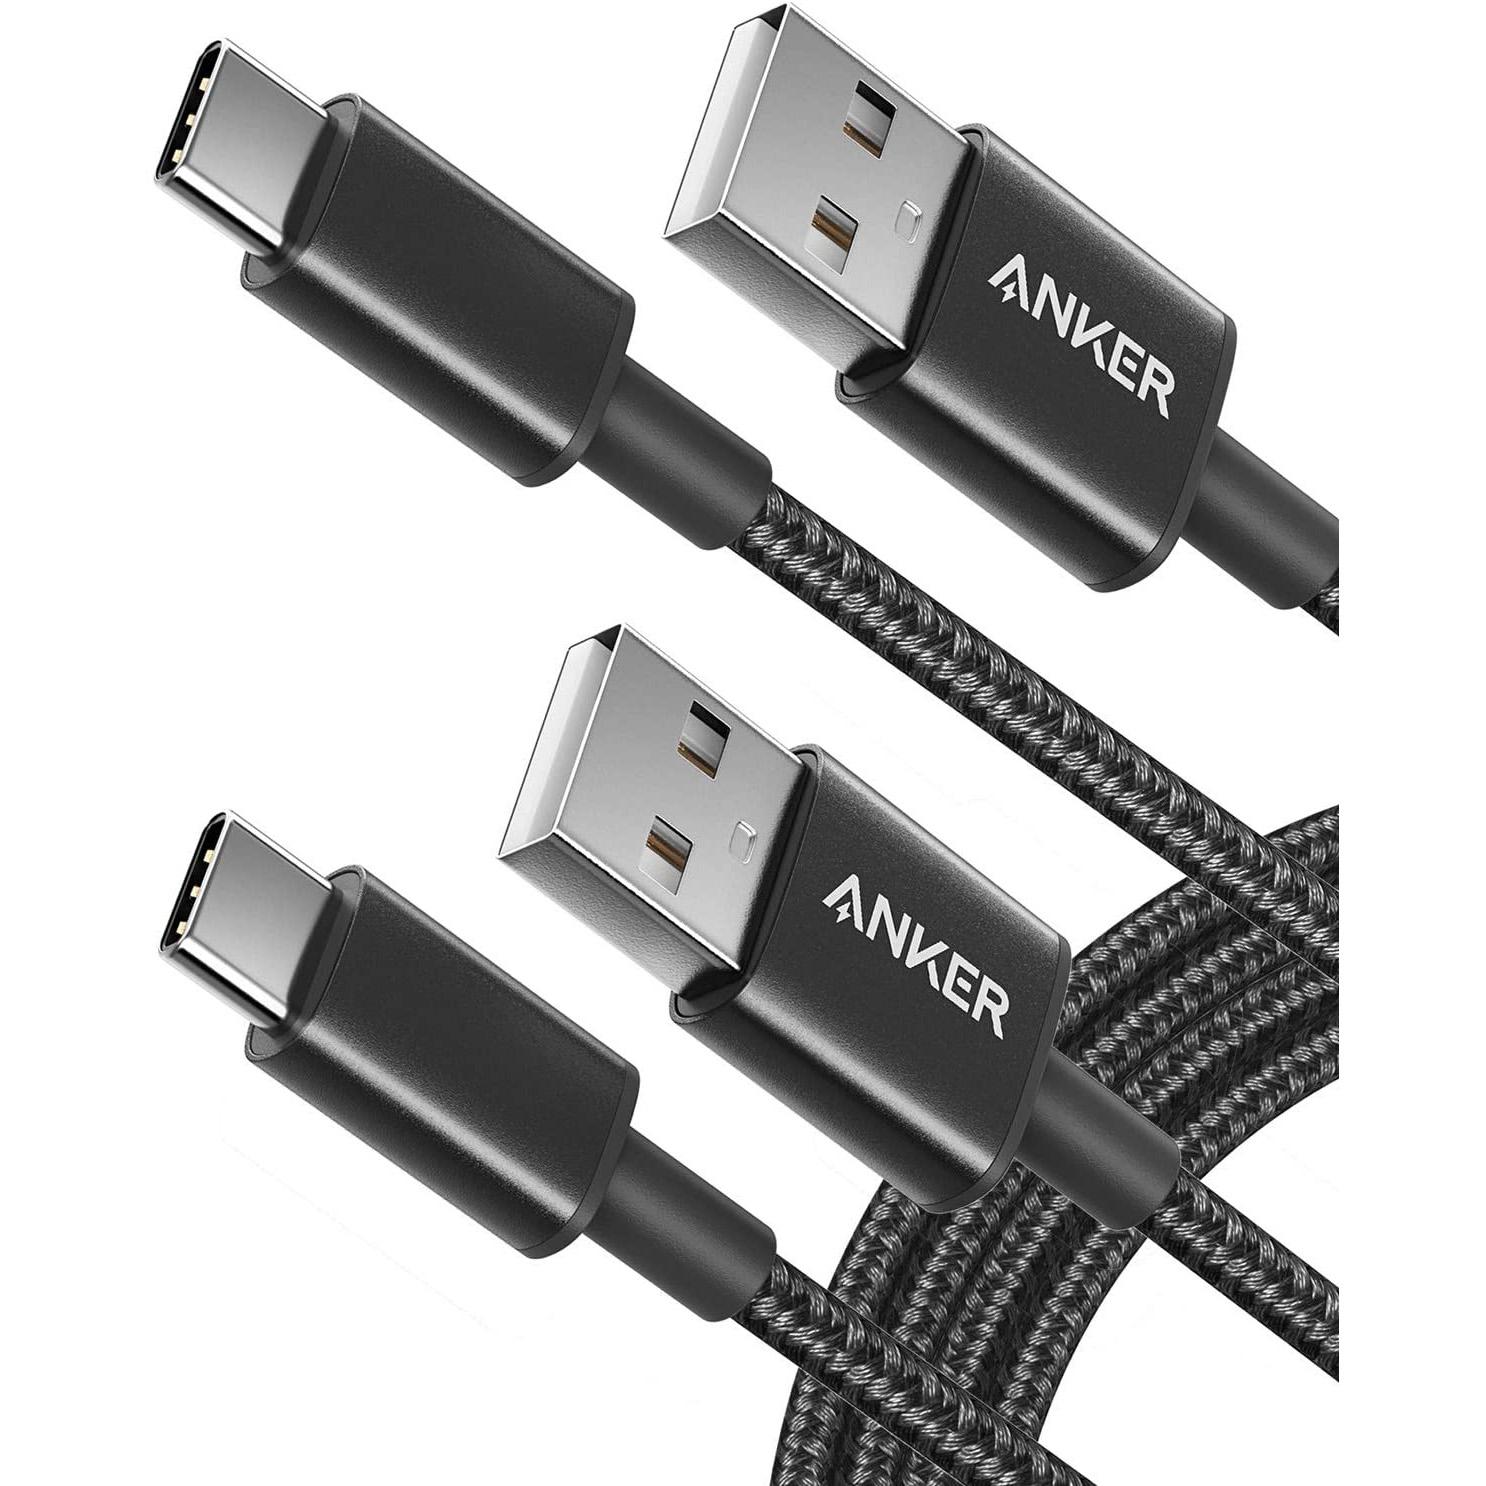 2 Anker Nylon-Braided USB-A to USB-C Cables for $6.99